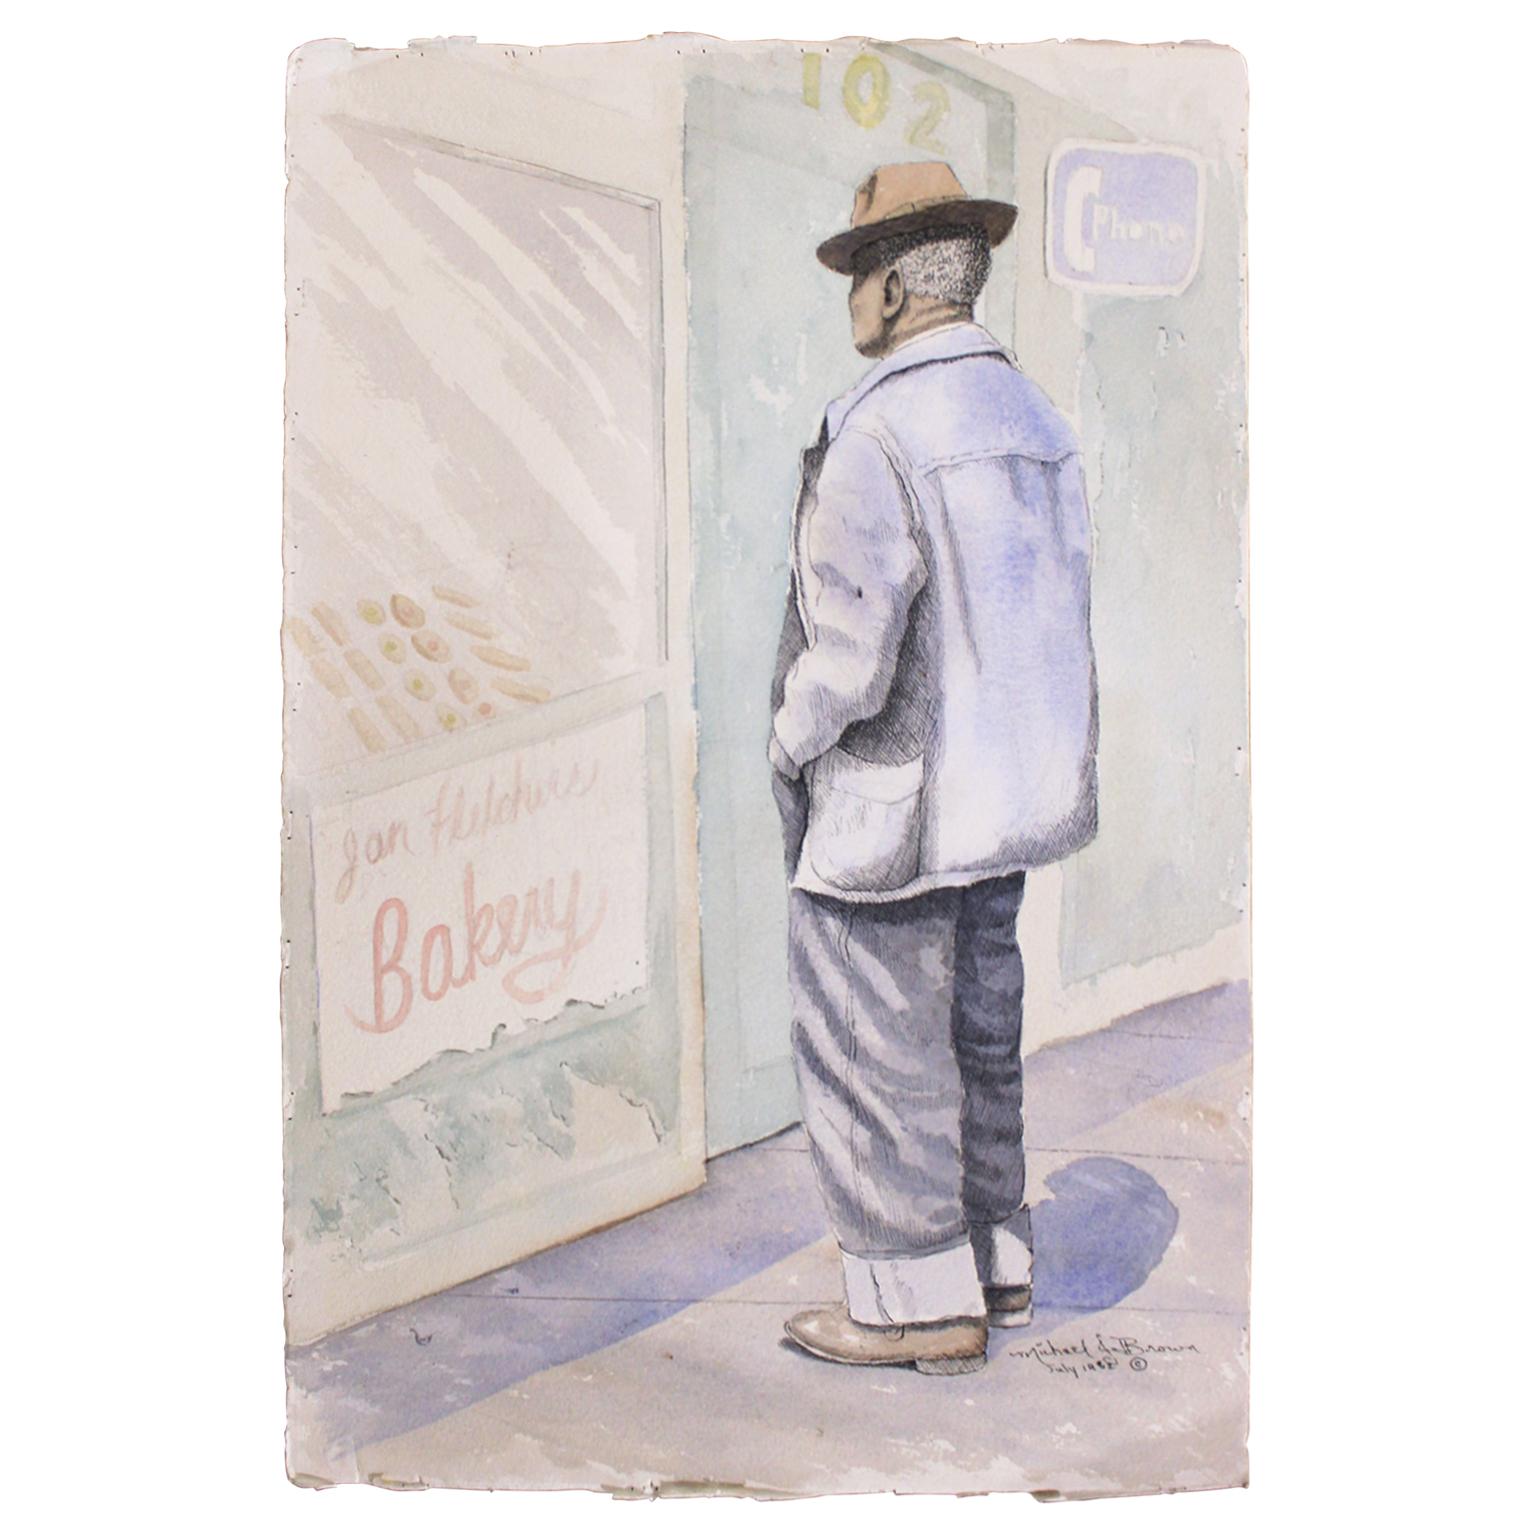 Michael Brown Figurative Art - Man In Front of Bakery Store Front